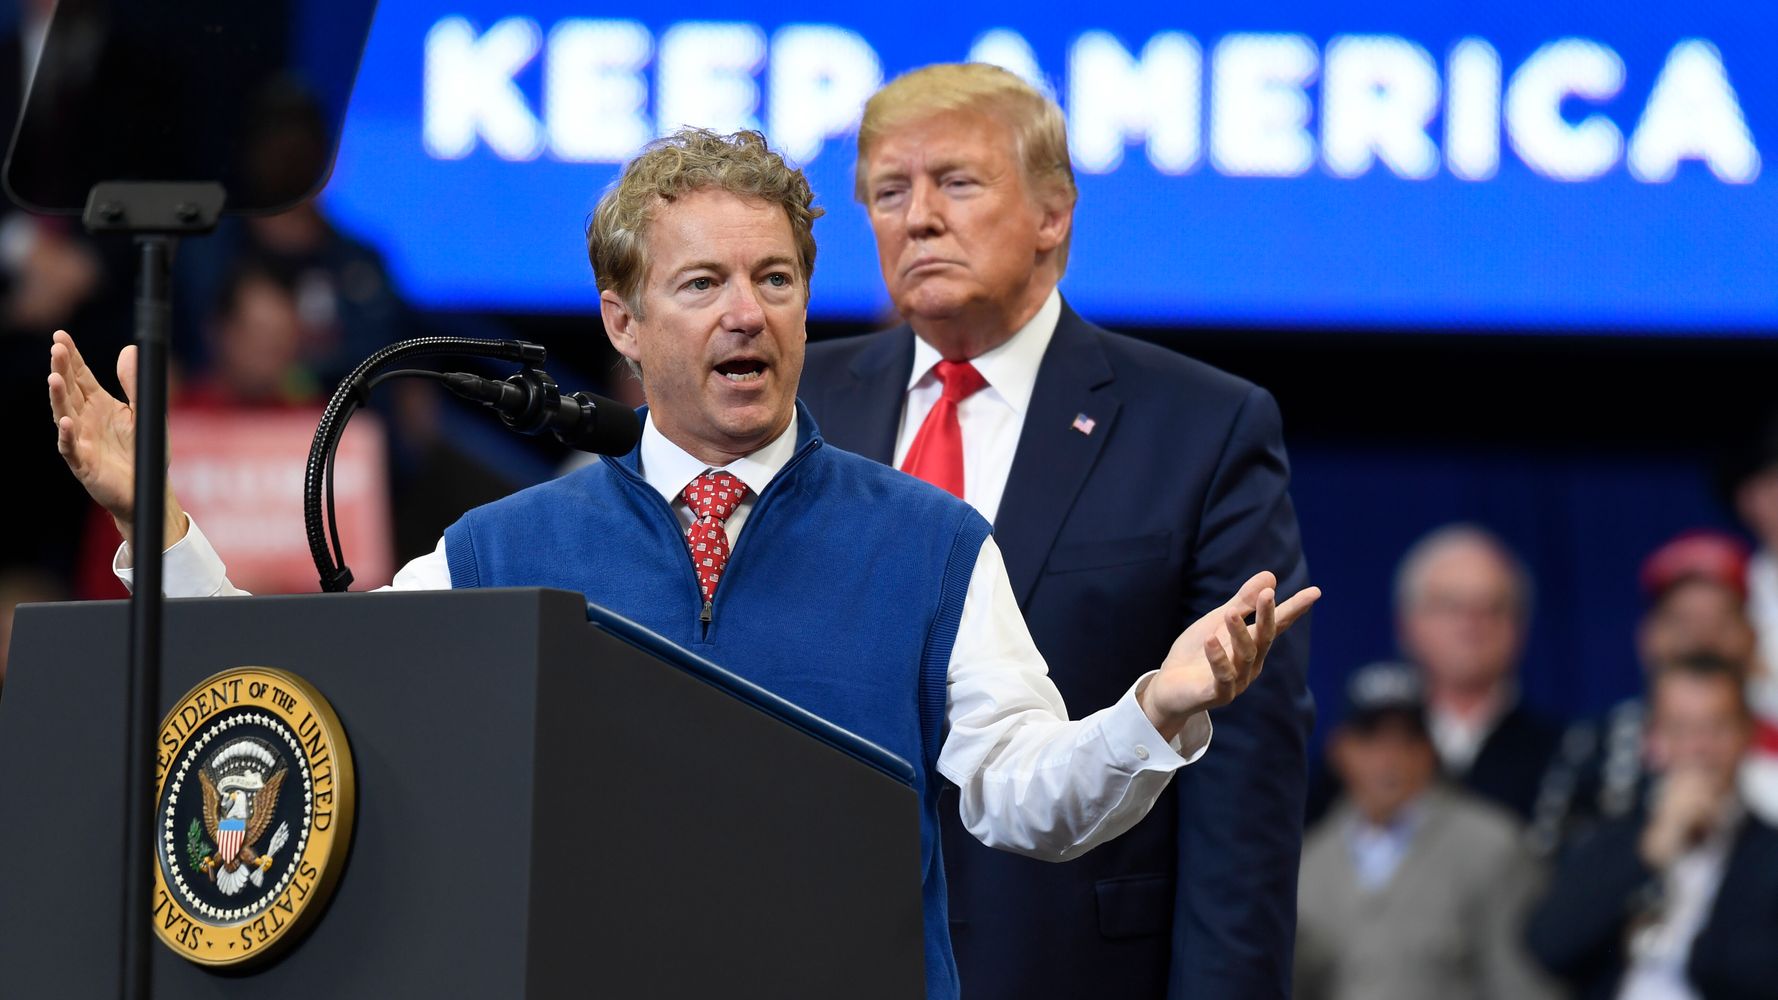 Rand Paul Presses Media To Out Whistleblower At Trump Rally | HuffPost